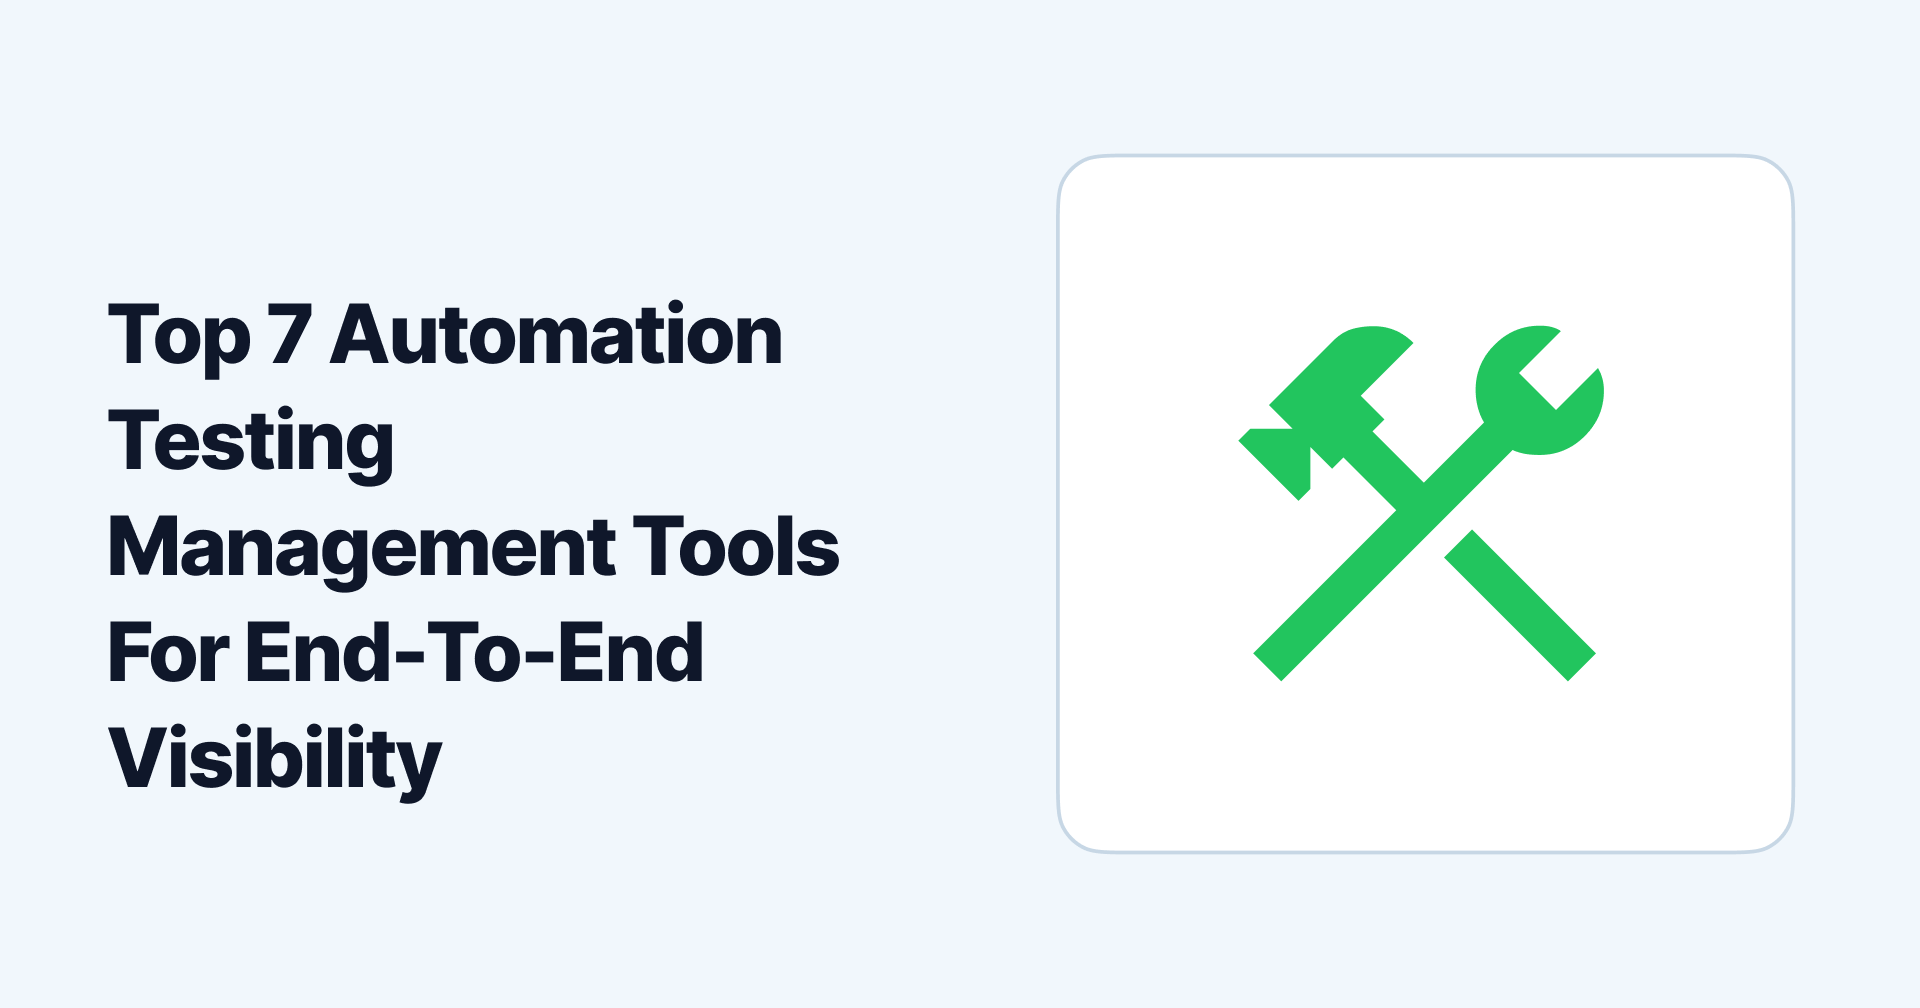 Top 7 Automation Testing Management Tools For End-To-End Visibility